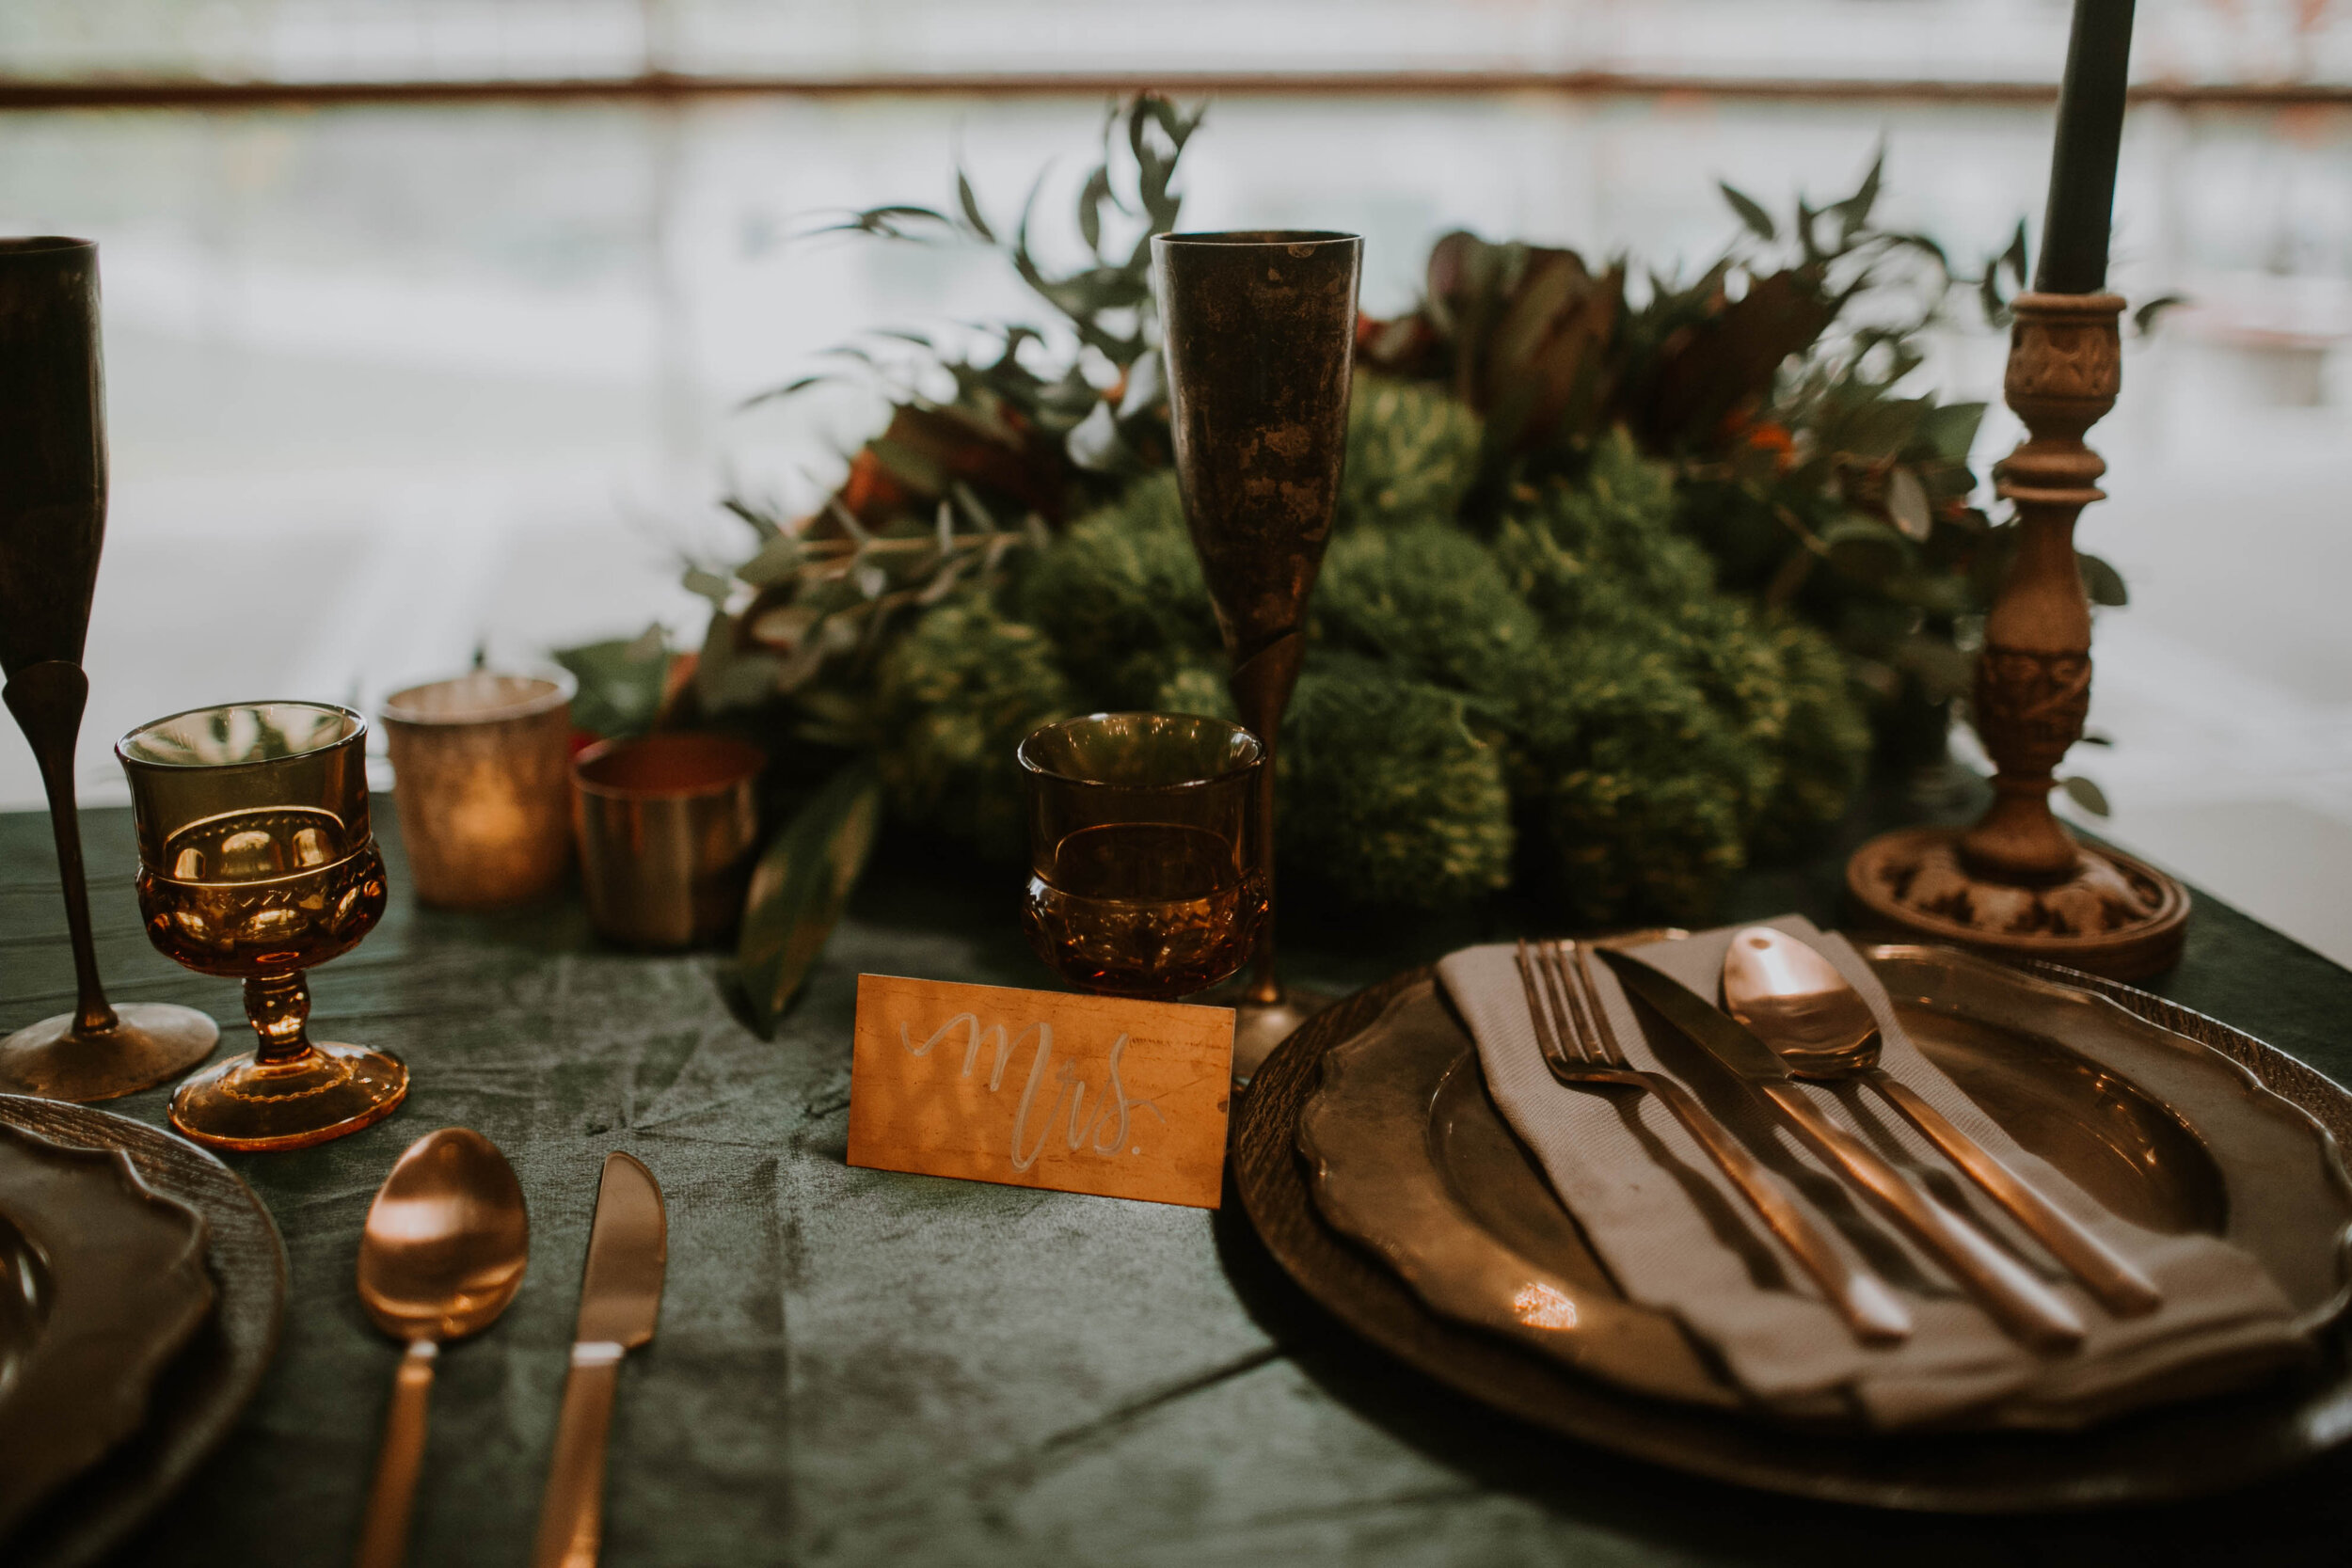 Moody Fall Wedding Styled Shoot captured by Gabrielle Daylor Photography. See more fall wedding ideas at CHItheeWED.com!